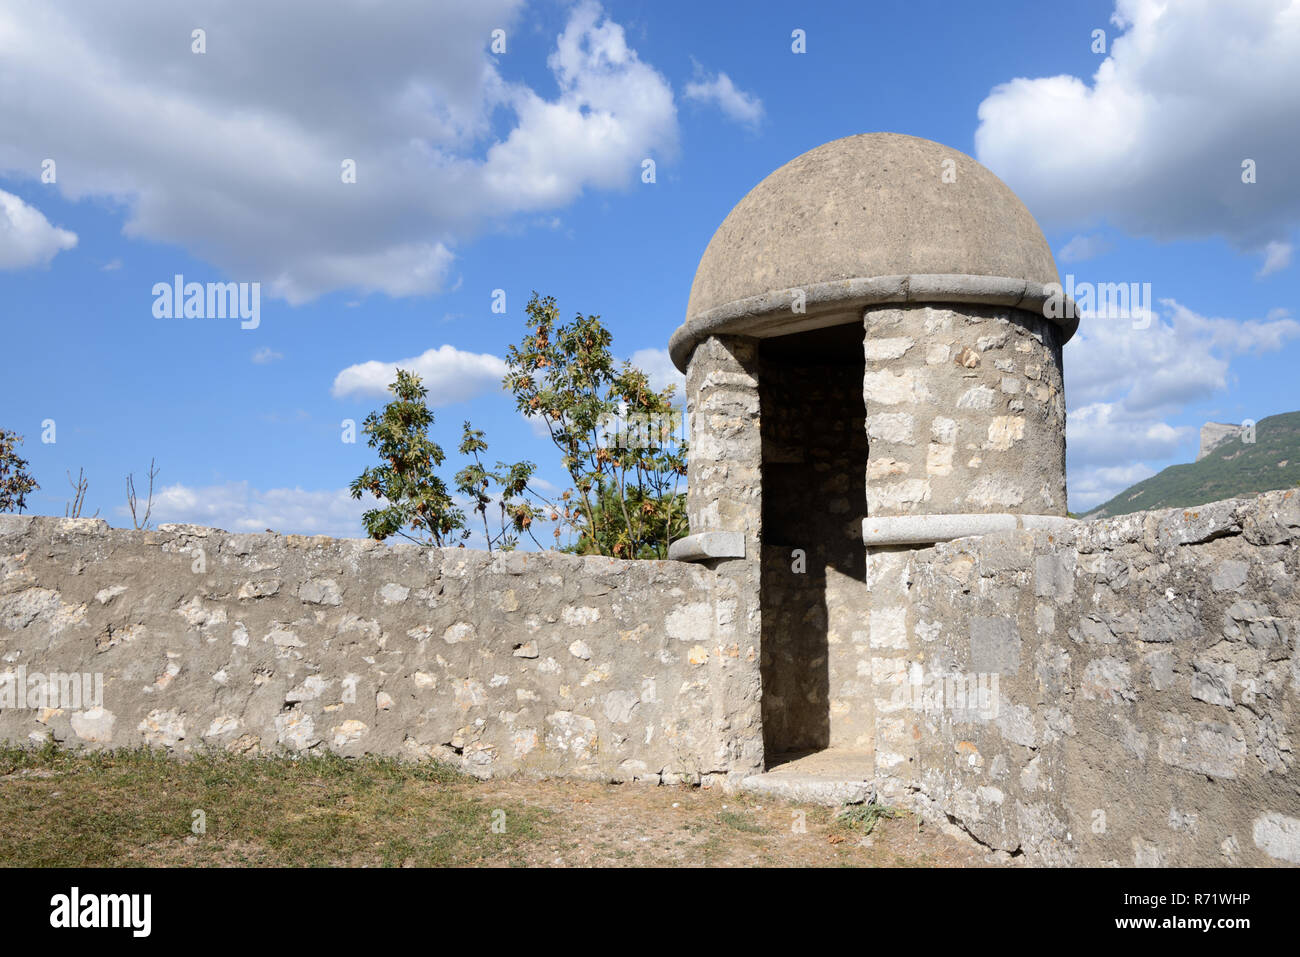 c16th Bartizan, Turret or Fortified Sentry Box in the Medieval Defense Walls of the Citadel, Fort, Castle or Fortress Sisteron Provence France Stock Photo